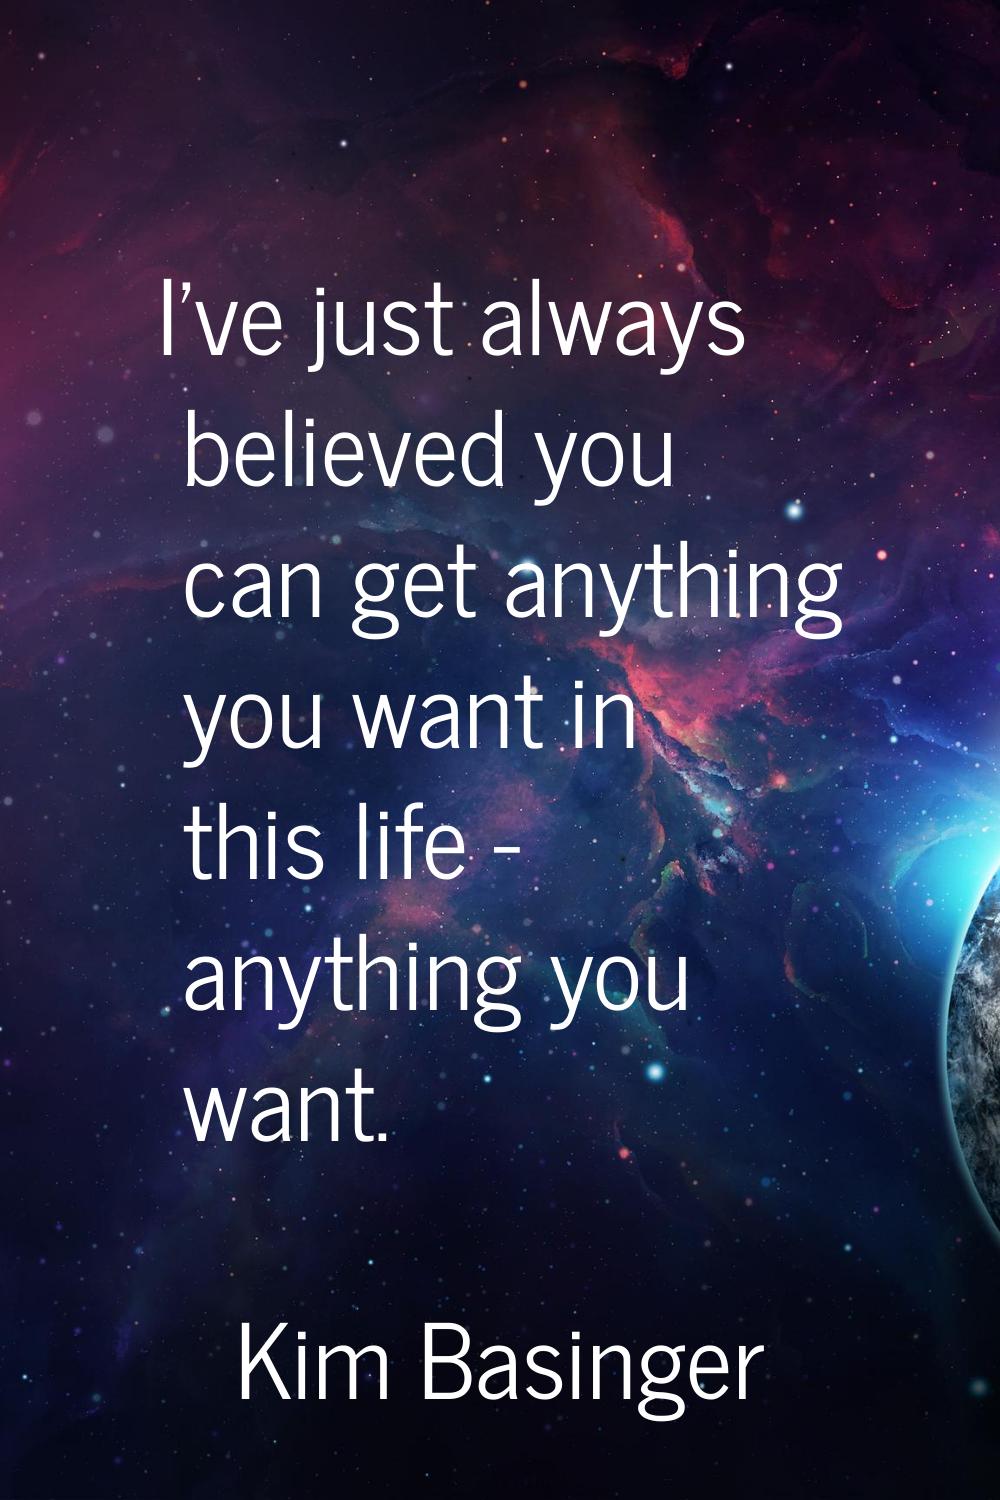 I've just always believed you can get anything you want in this life - anything you want.